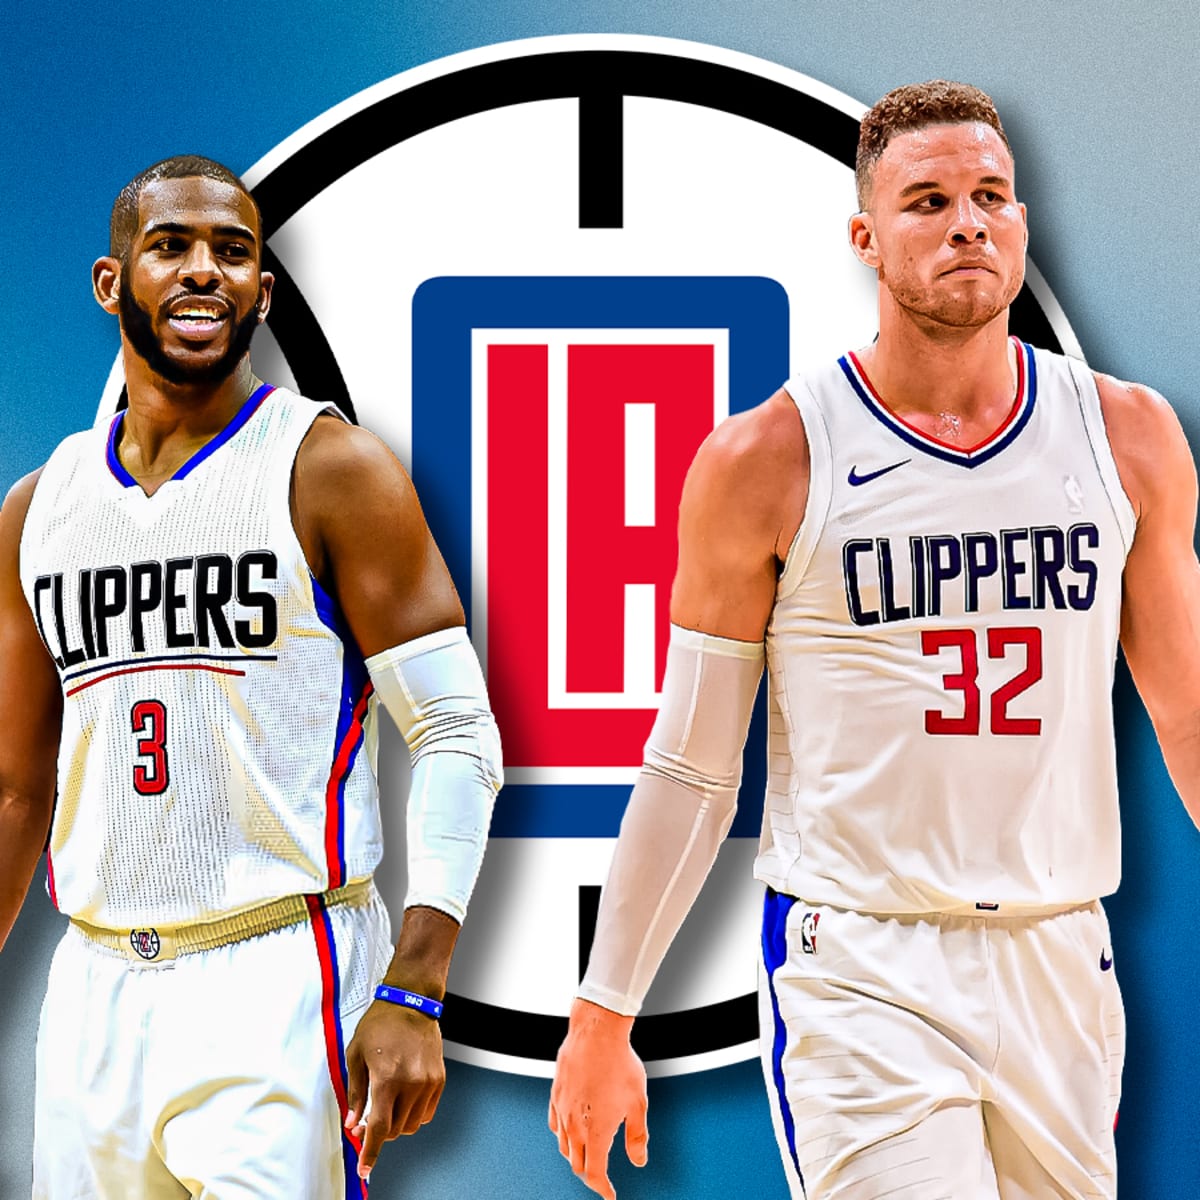 Chris Paul Remembers Blake Griffin And The Lob City Clippers: I